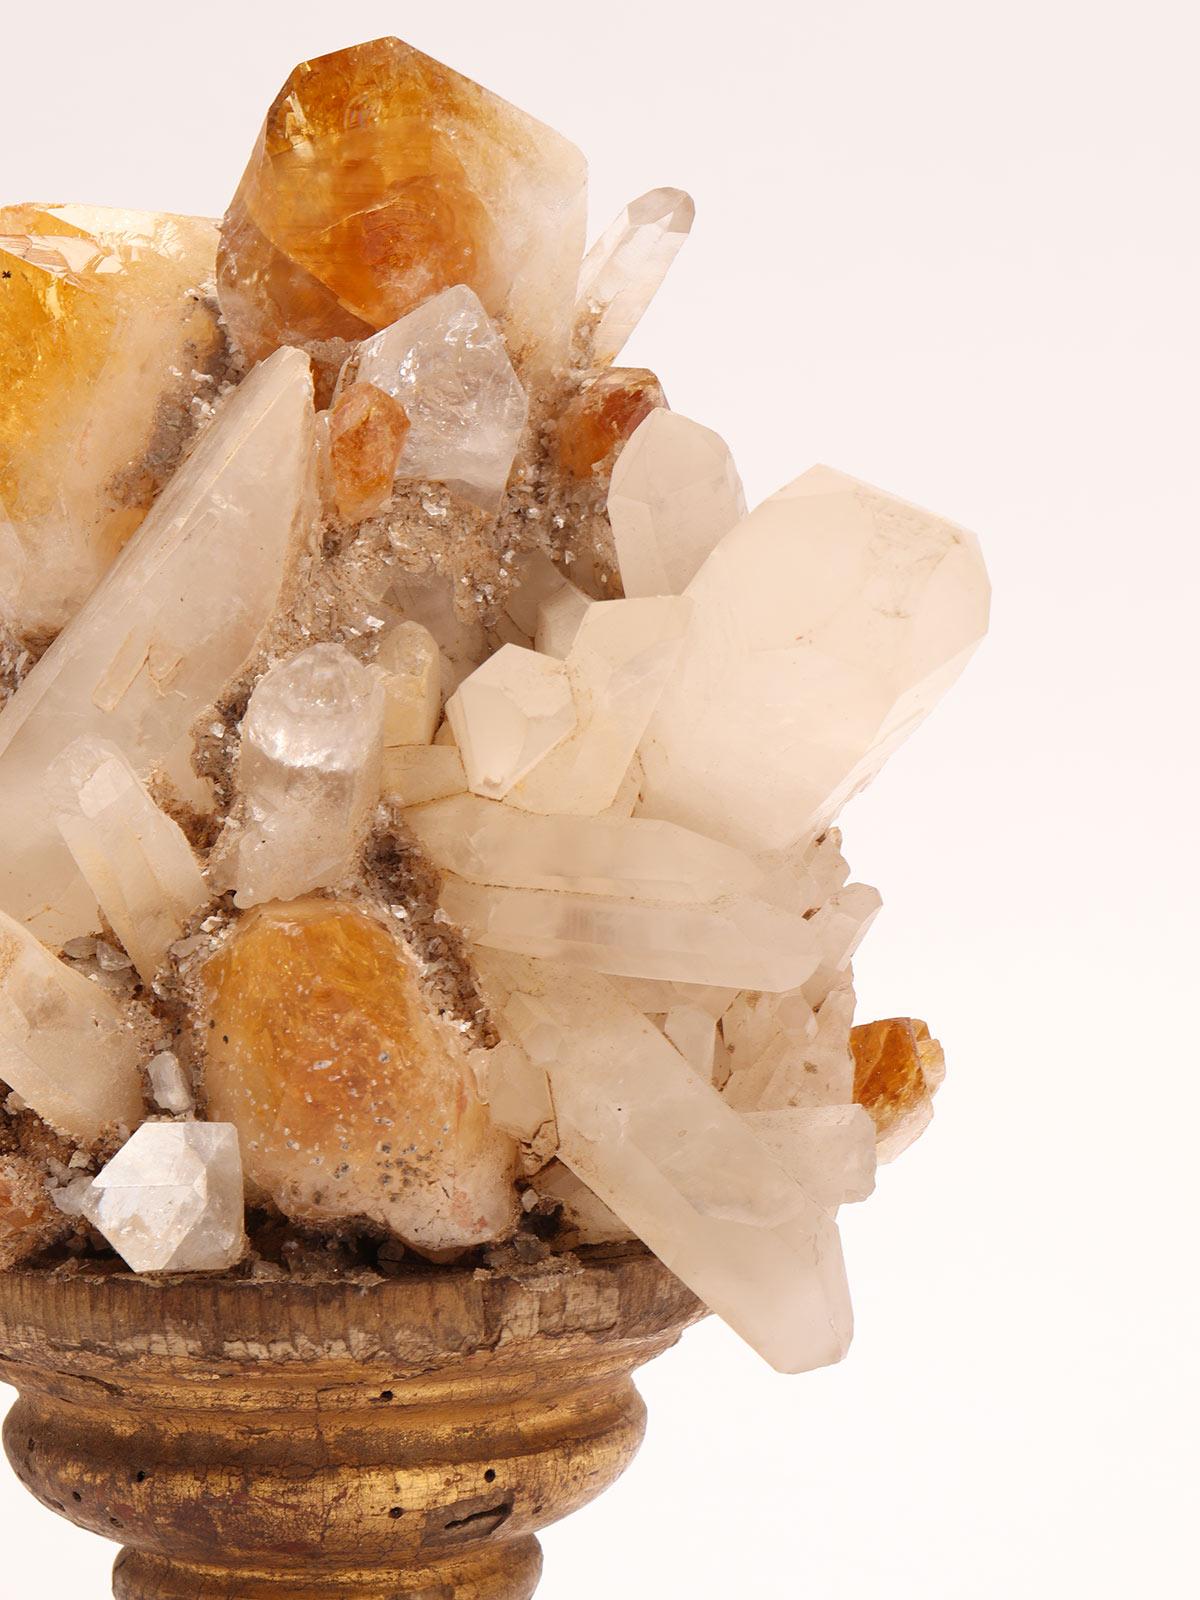 what mineral group is quartz in